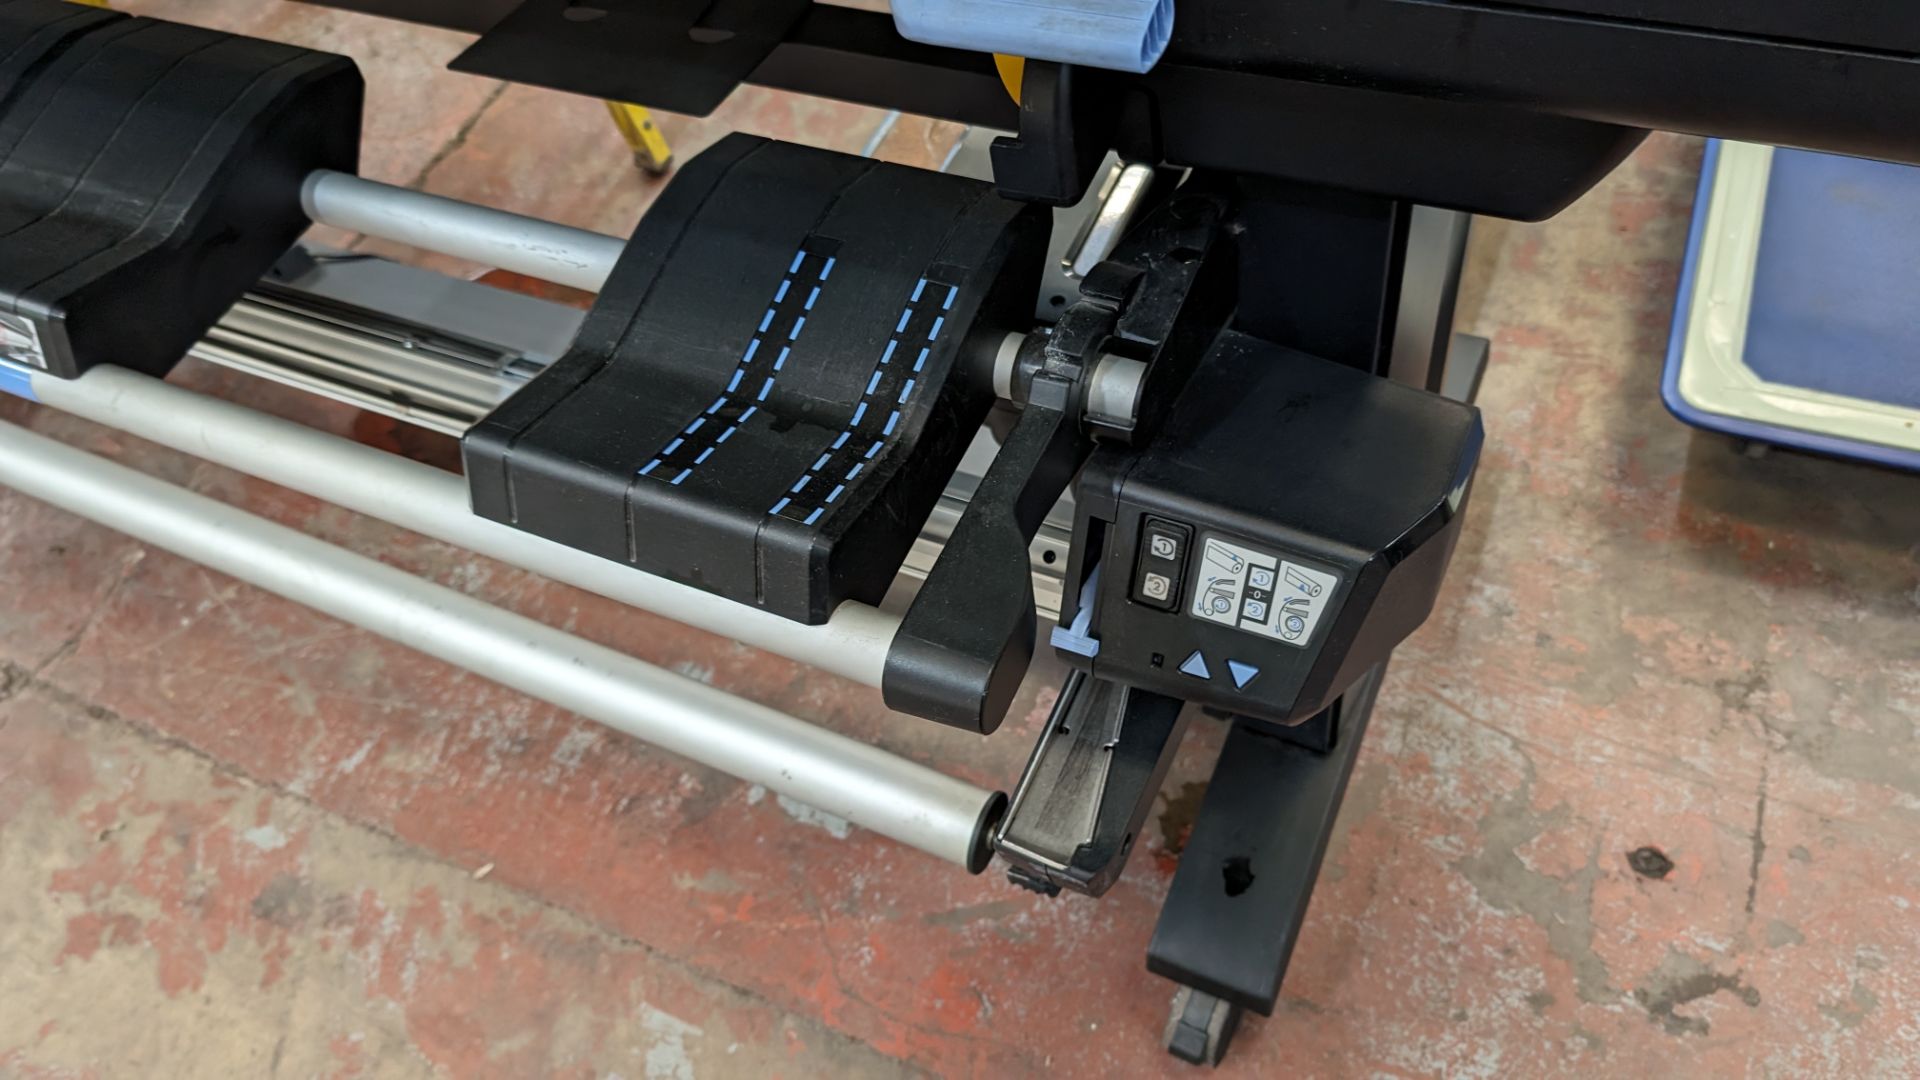 HP DesignJet L26500 wide format printer with latex inks and motorised roller, 61" capacity - Image 7 of 18